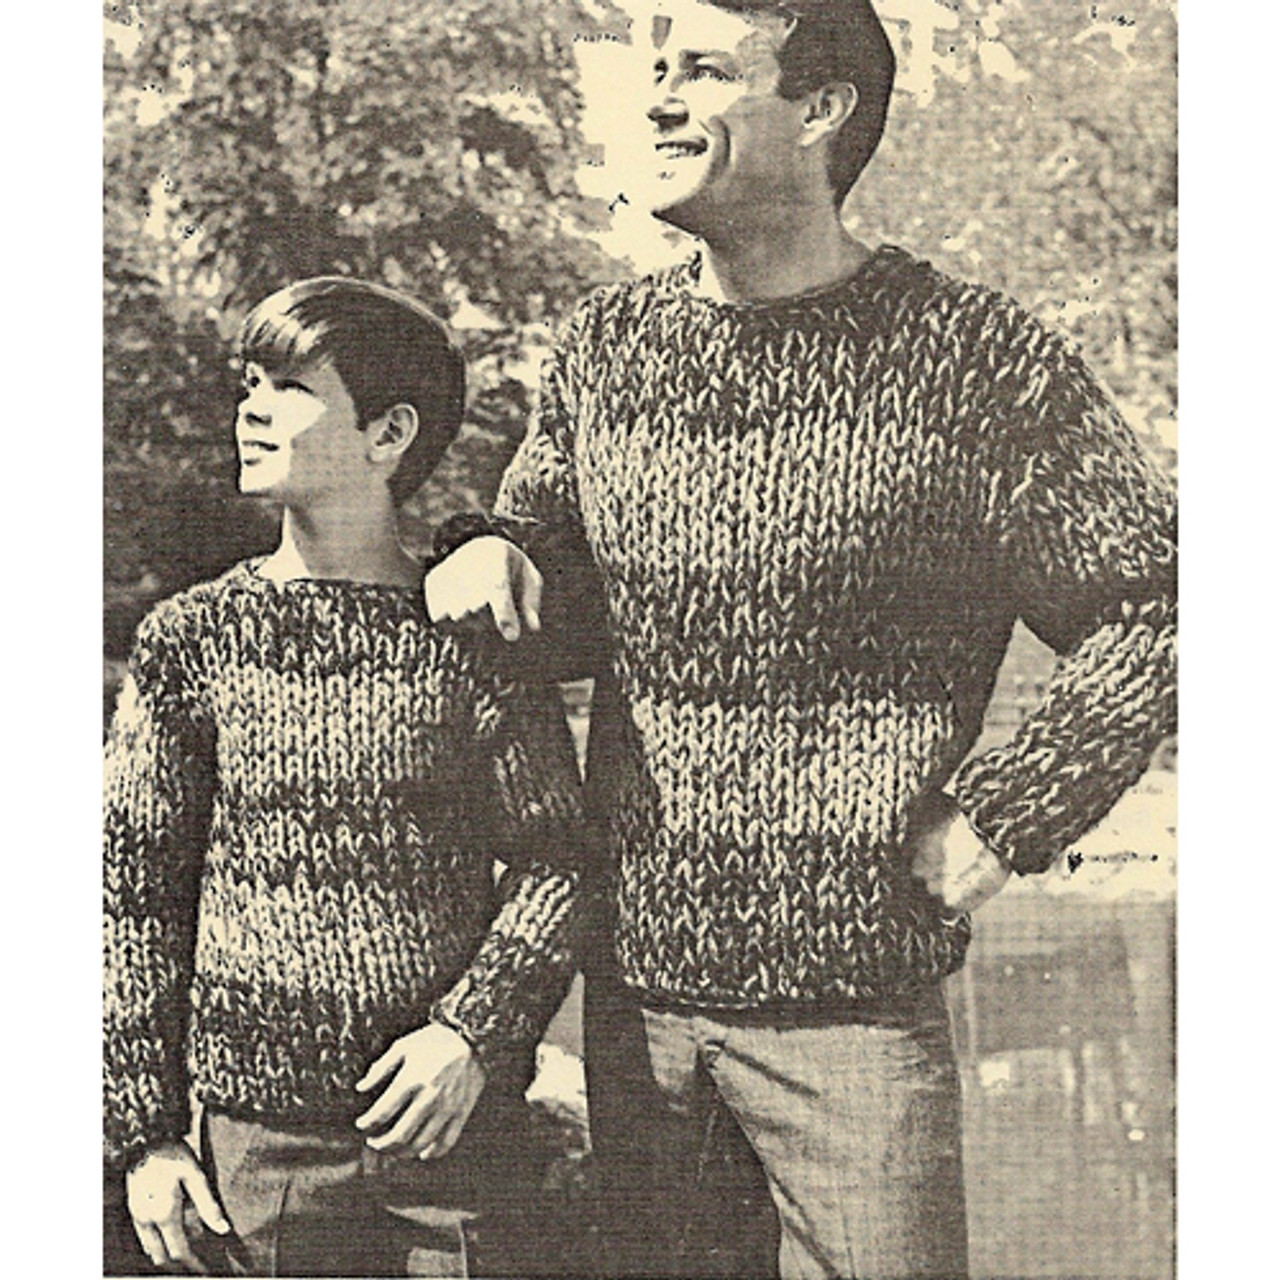 Father Son Striped Sweaters Knitting Pattern on Big Needles